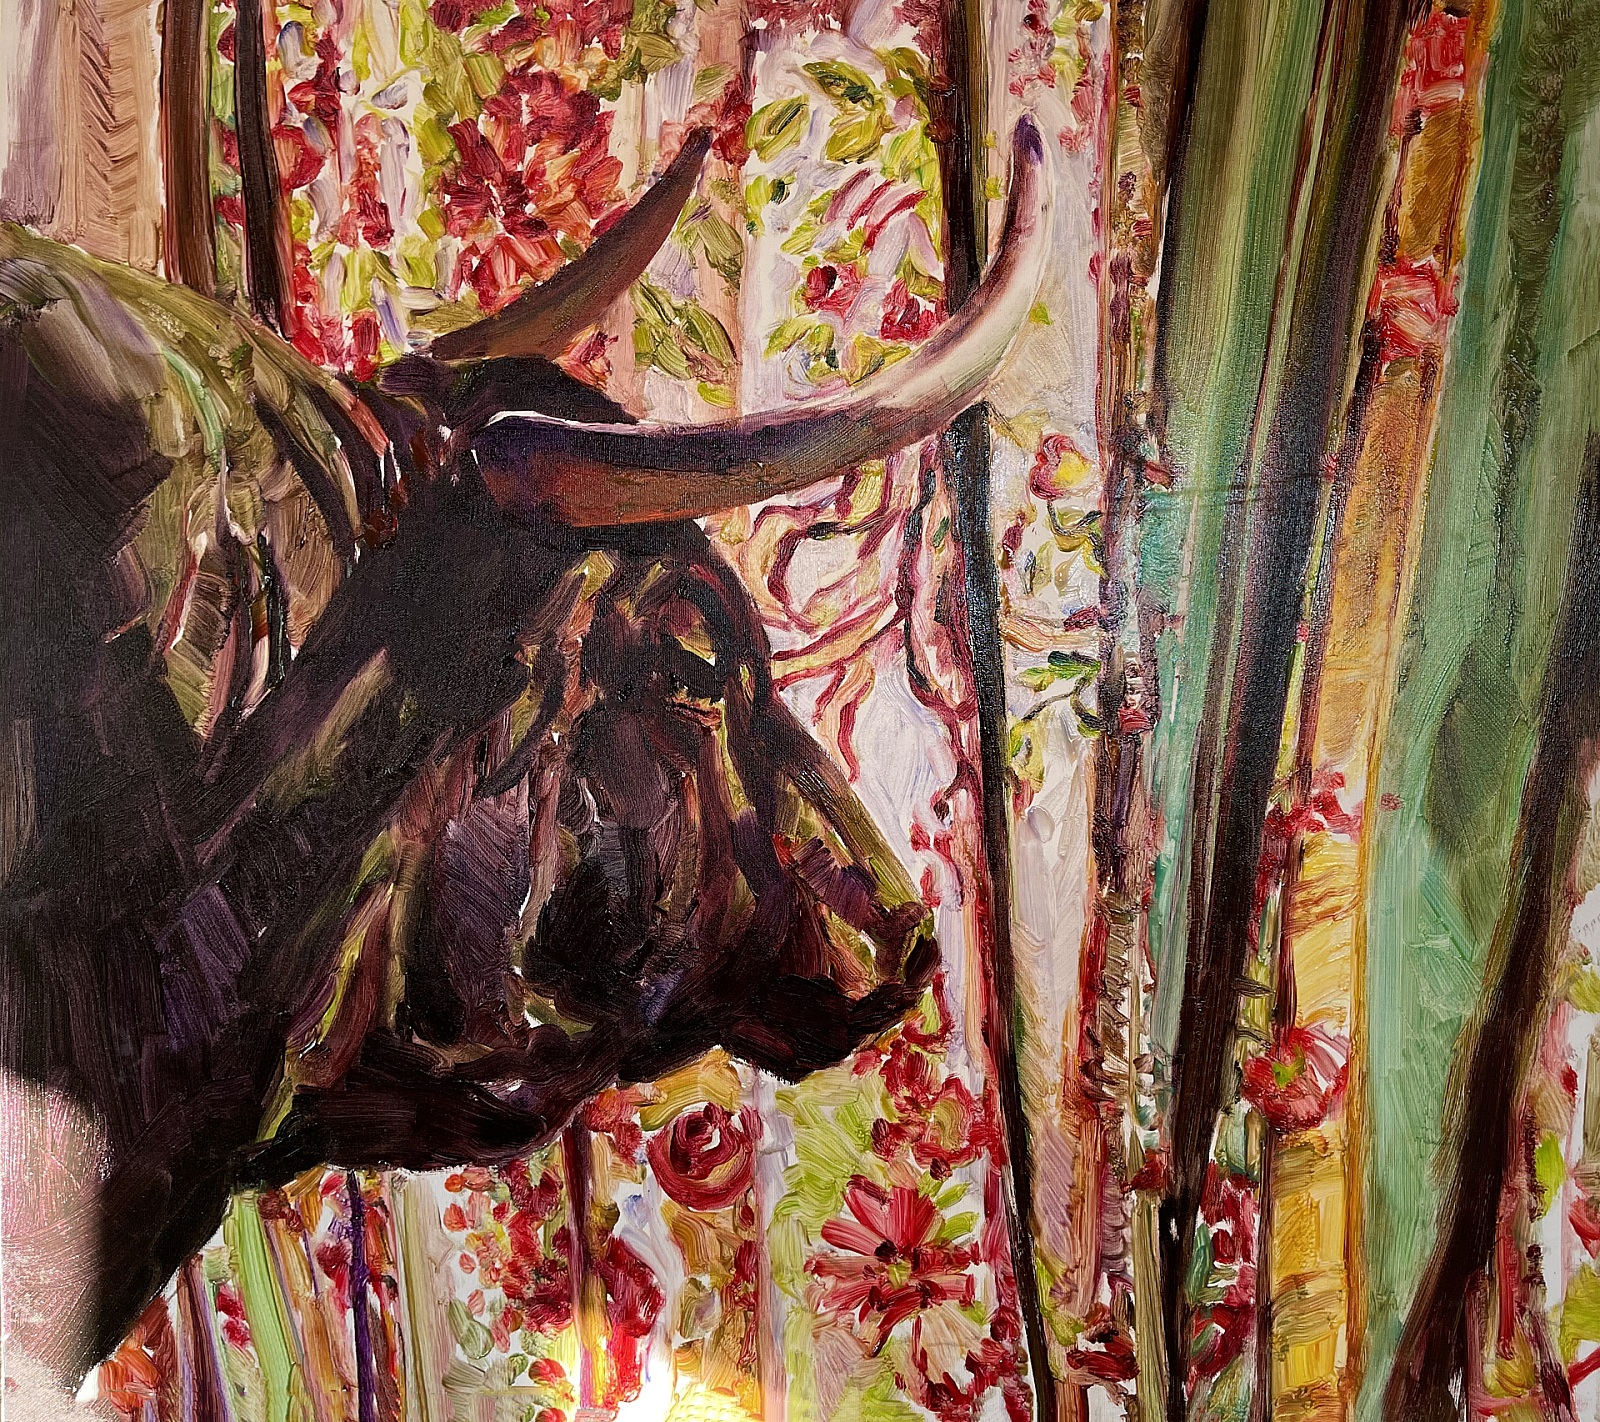 Bull with Curtain - 2020, oil on canvas, 70 x 70 cm,  private collection, RO - 13